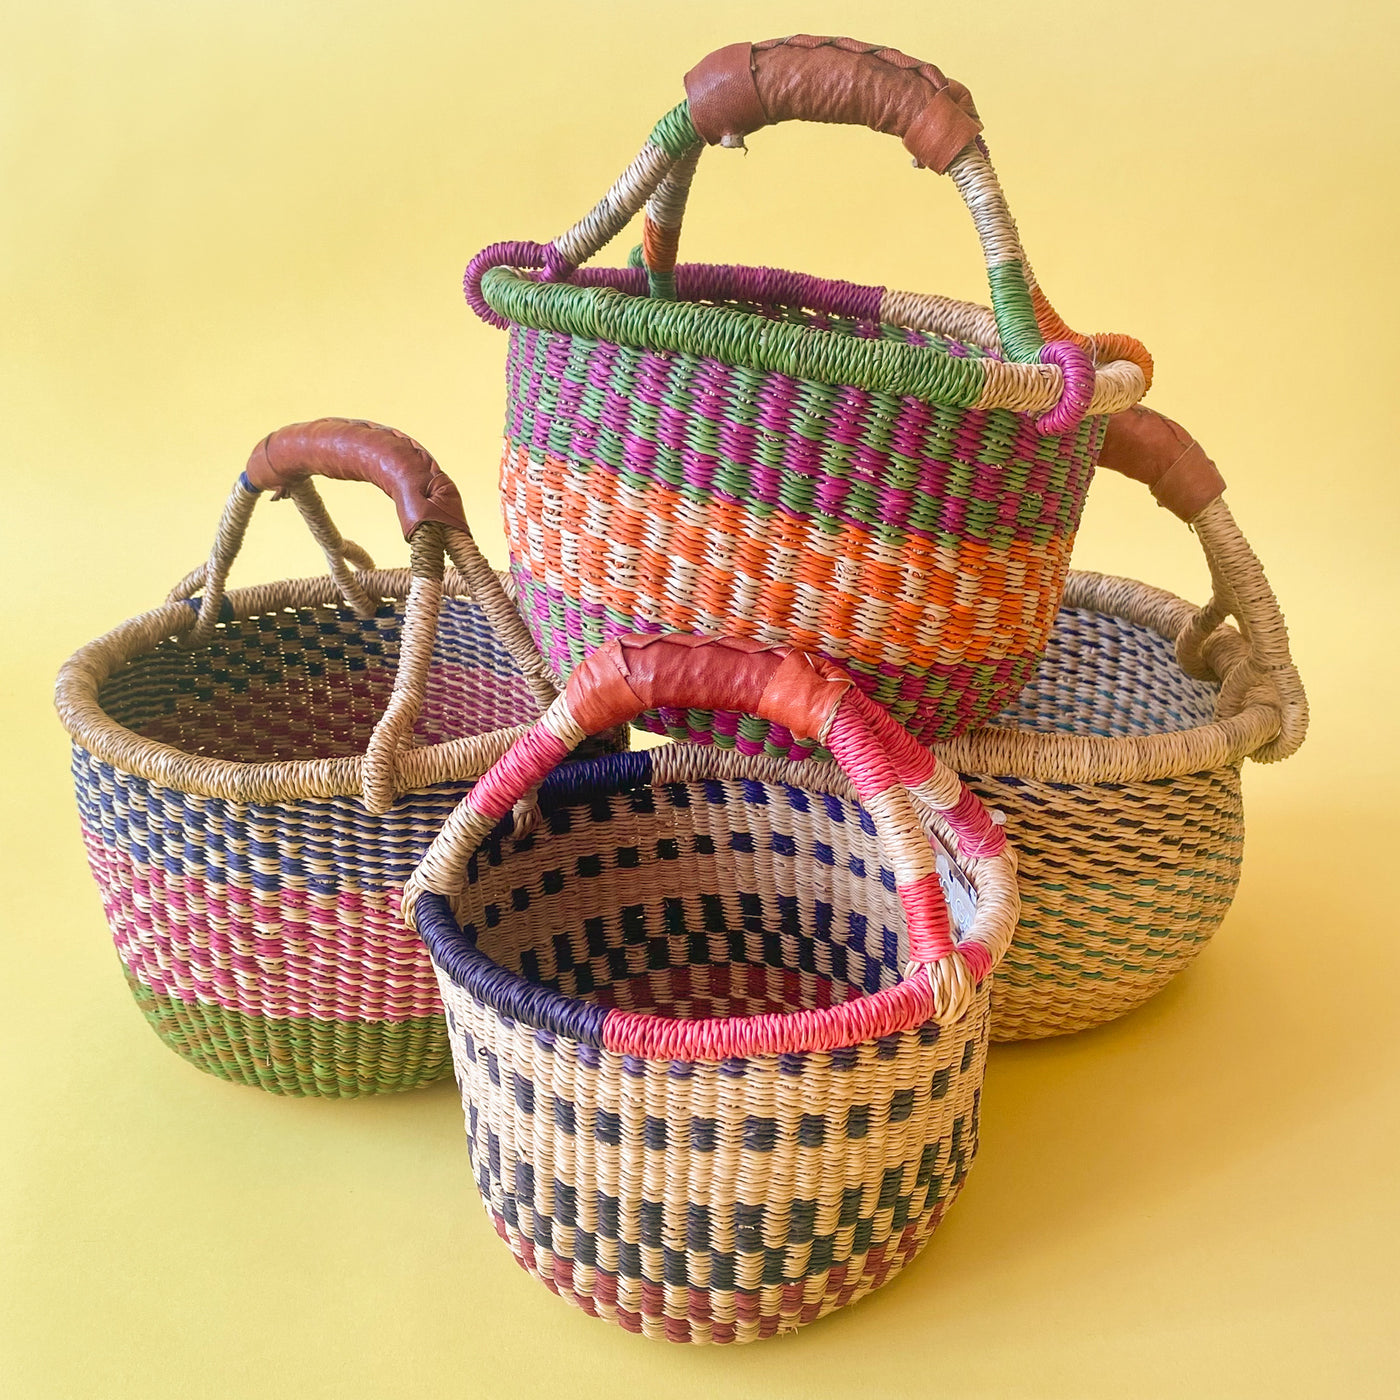 Handmade Baby Bolga Baskets in multicolours with a Leather Handle